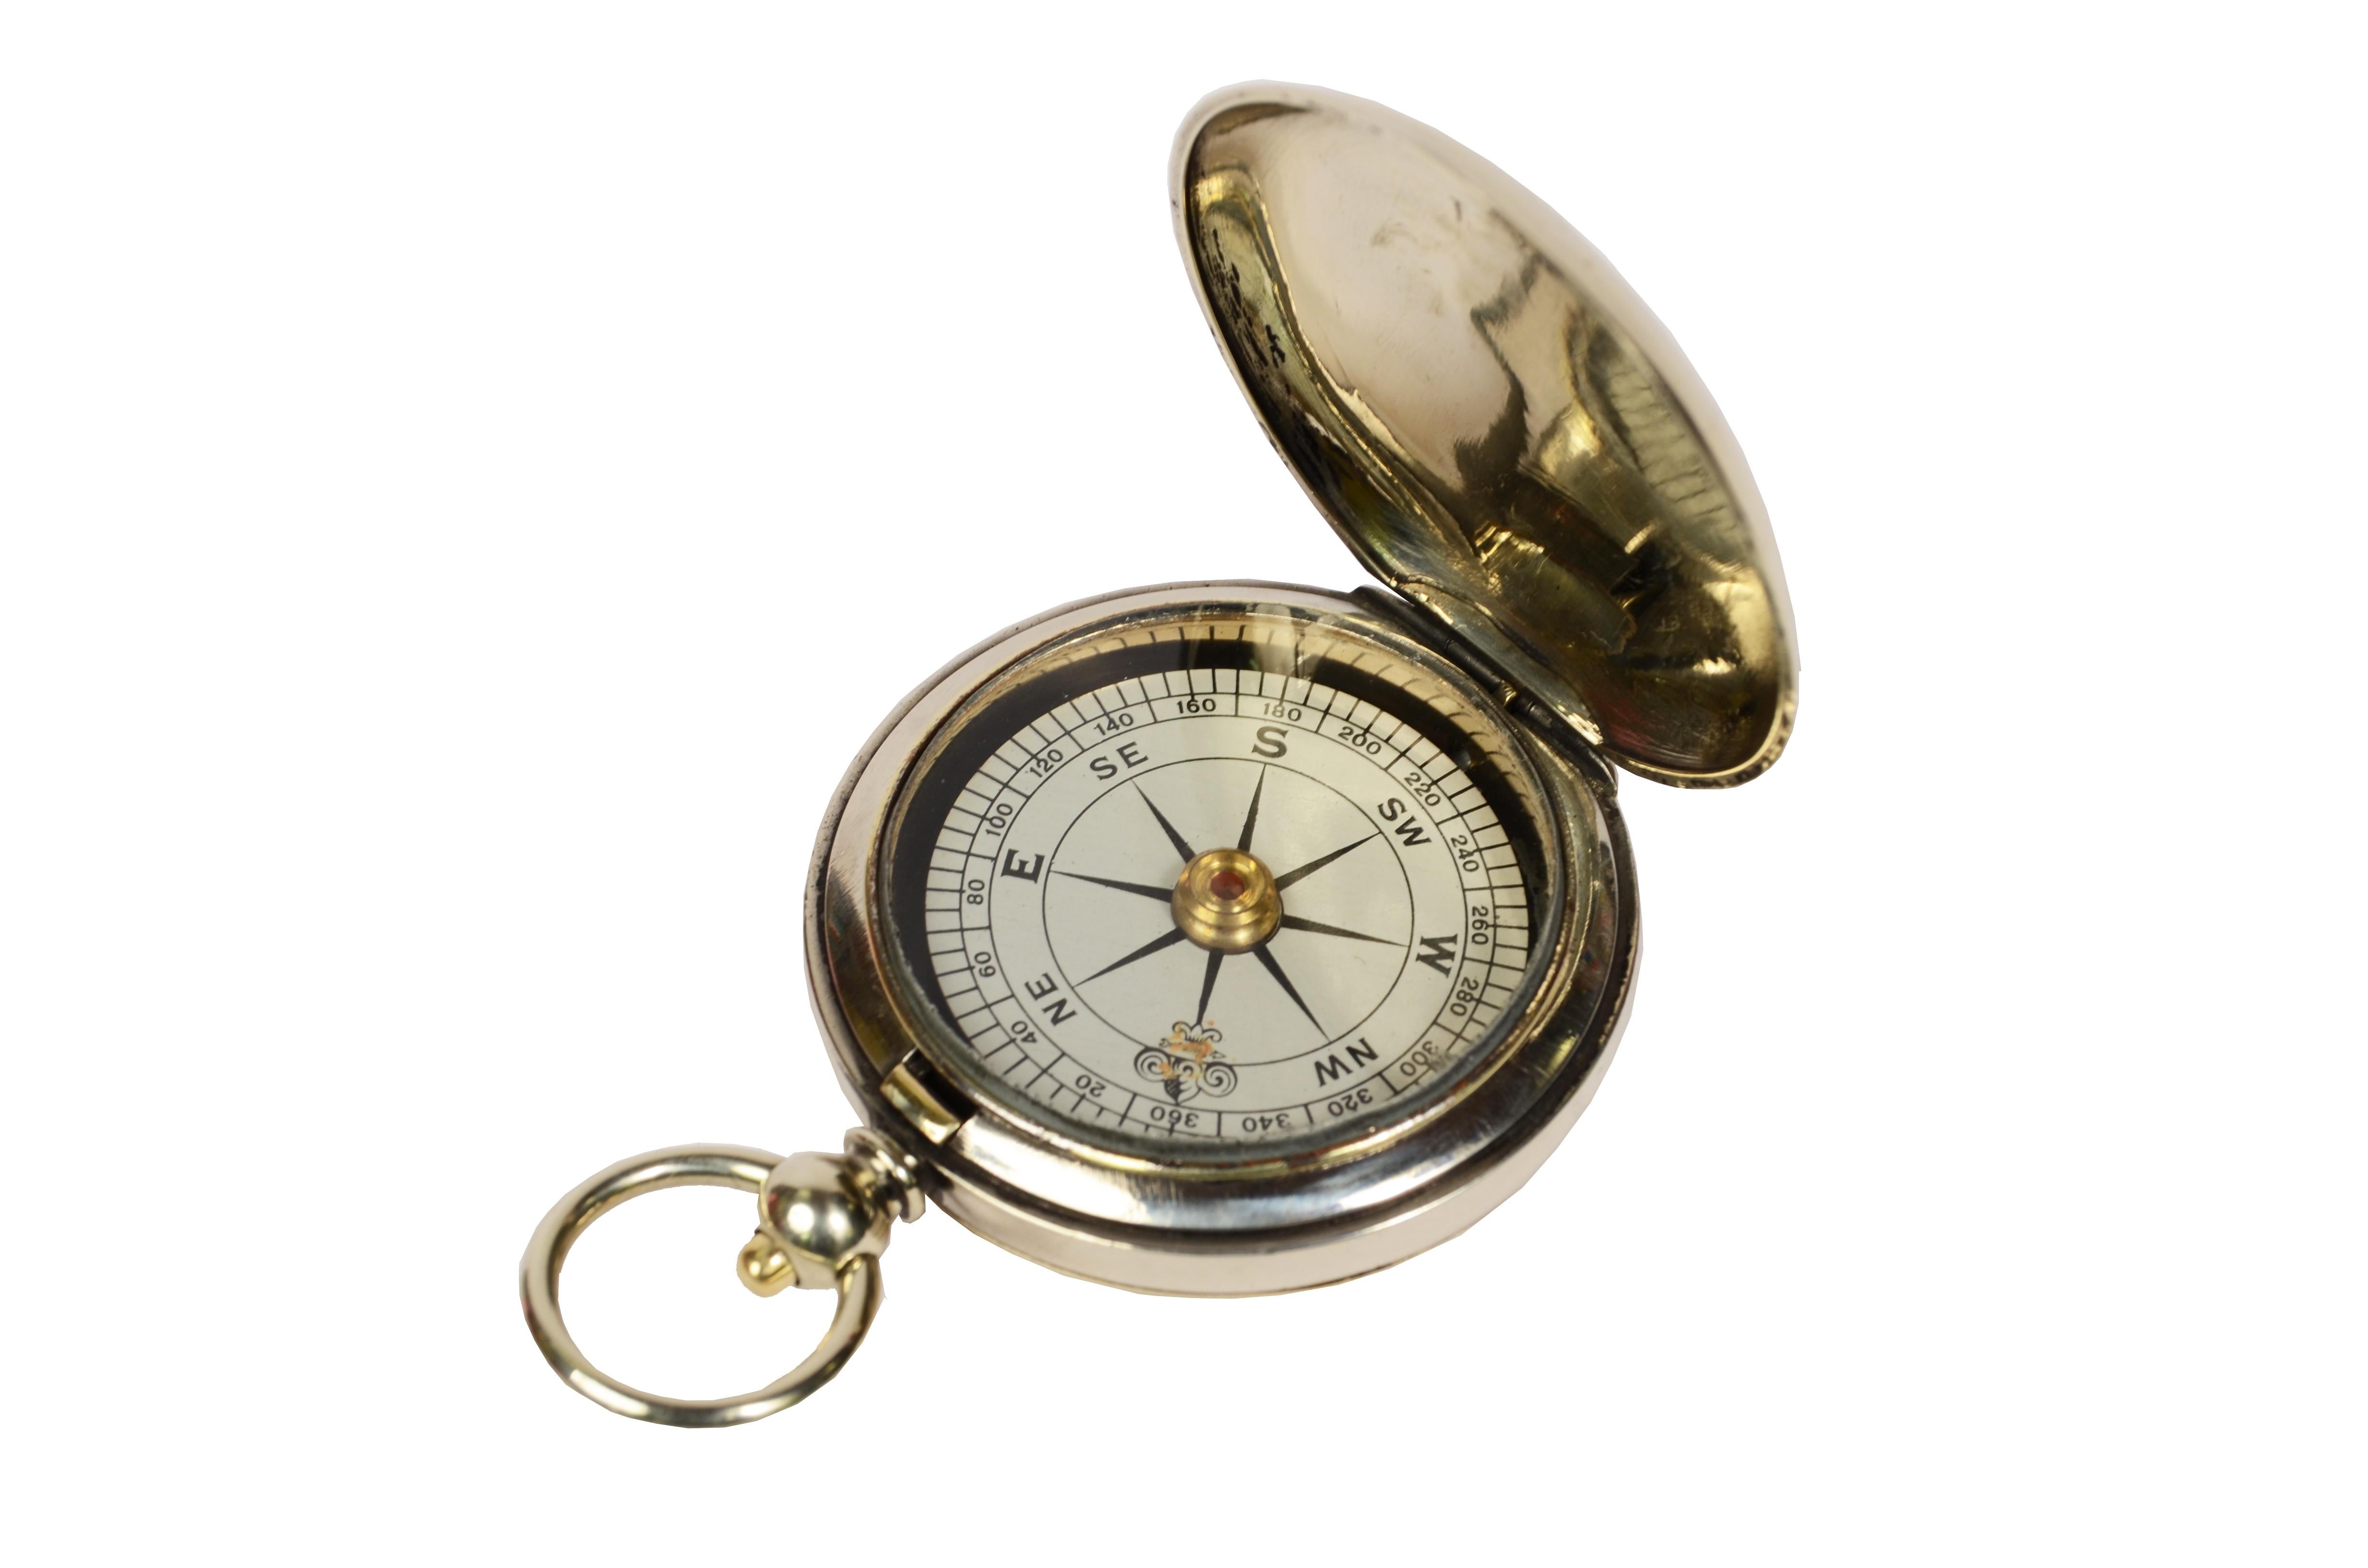 Pocket brass compass used by British aviation officers during the first World War
In the shape of a pocket watch. The compass has a snap-lock lid with release button inside the ring . 
Height-winds compass card complete with goniometric circle for